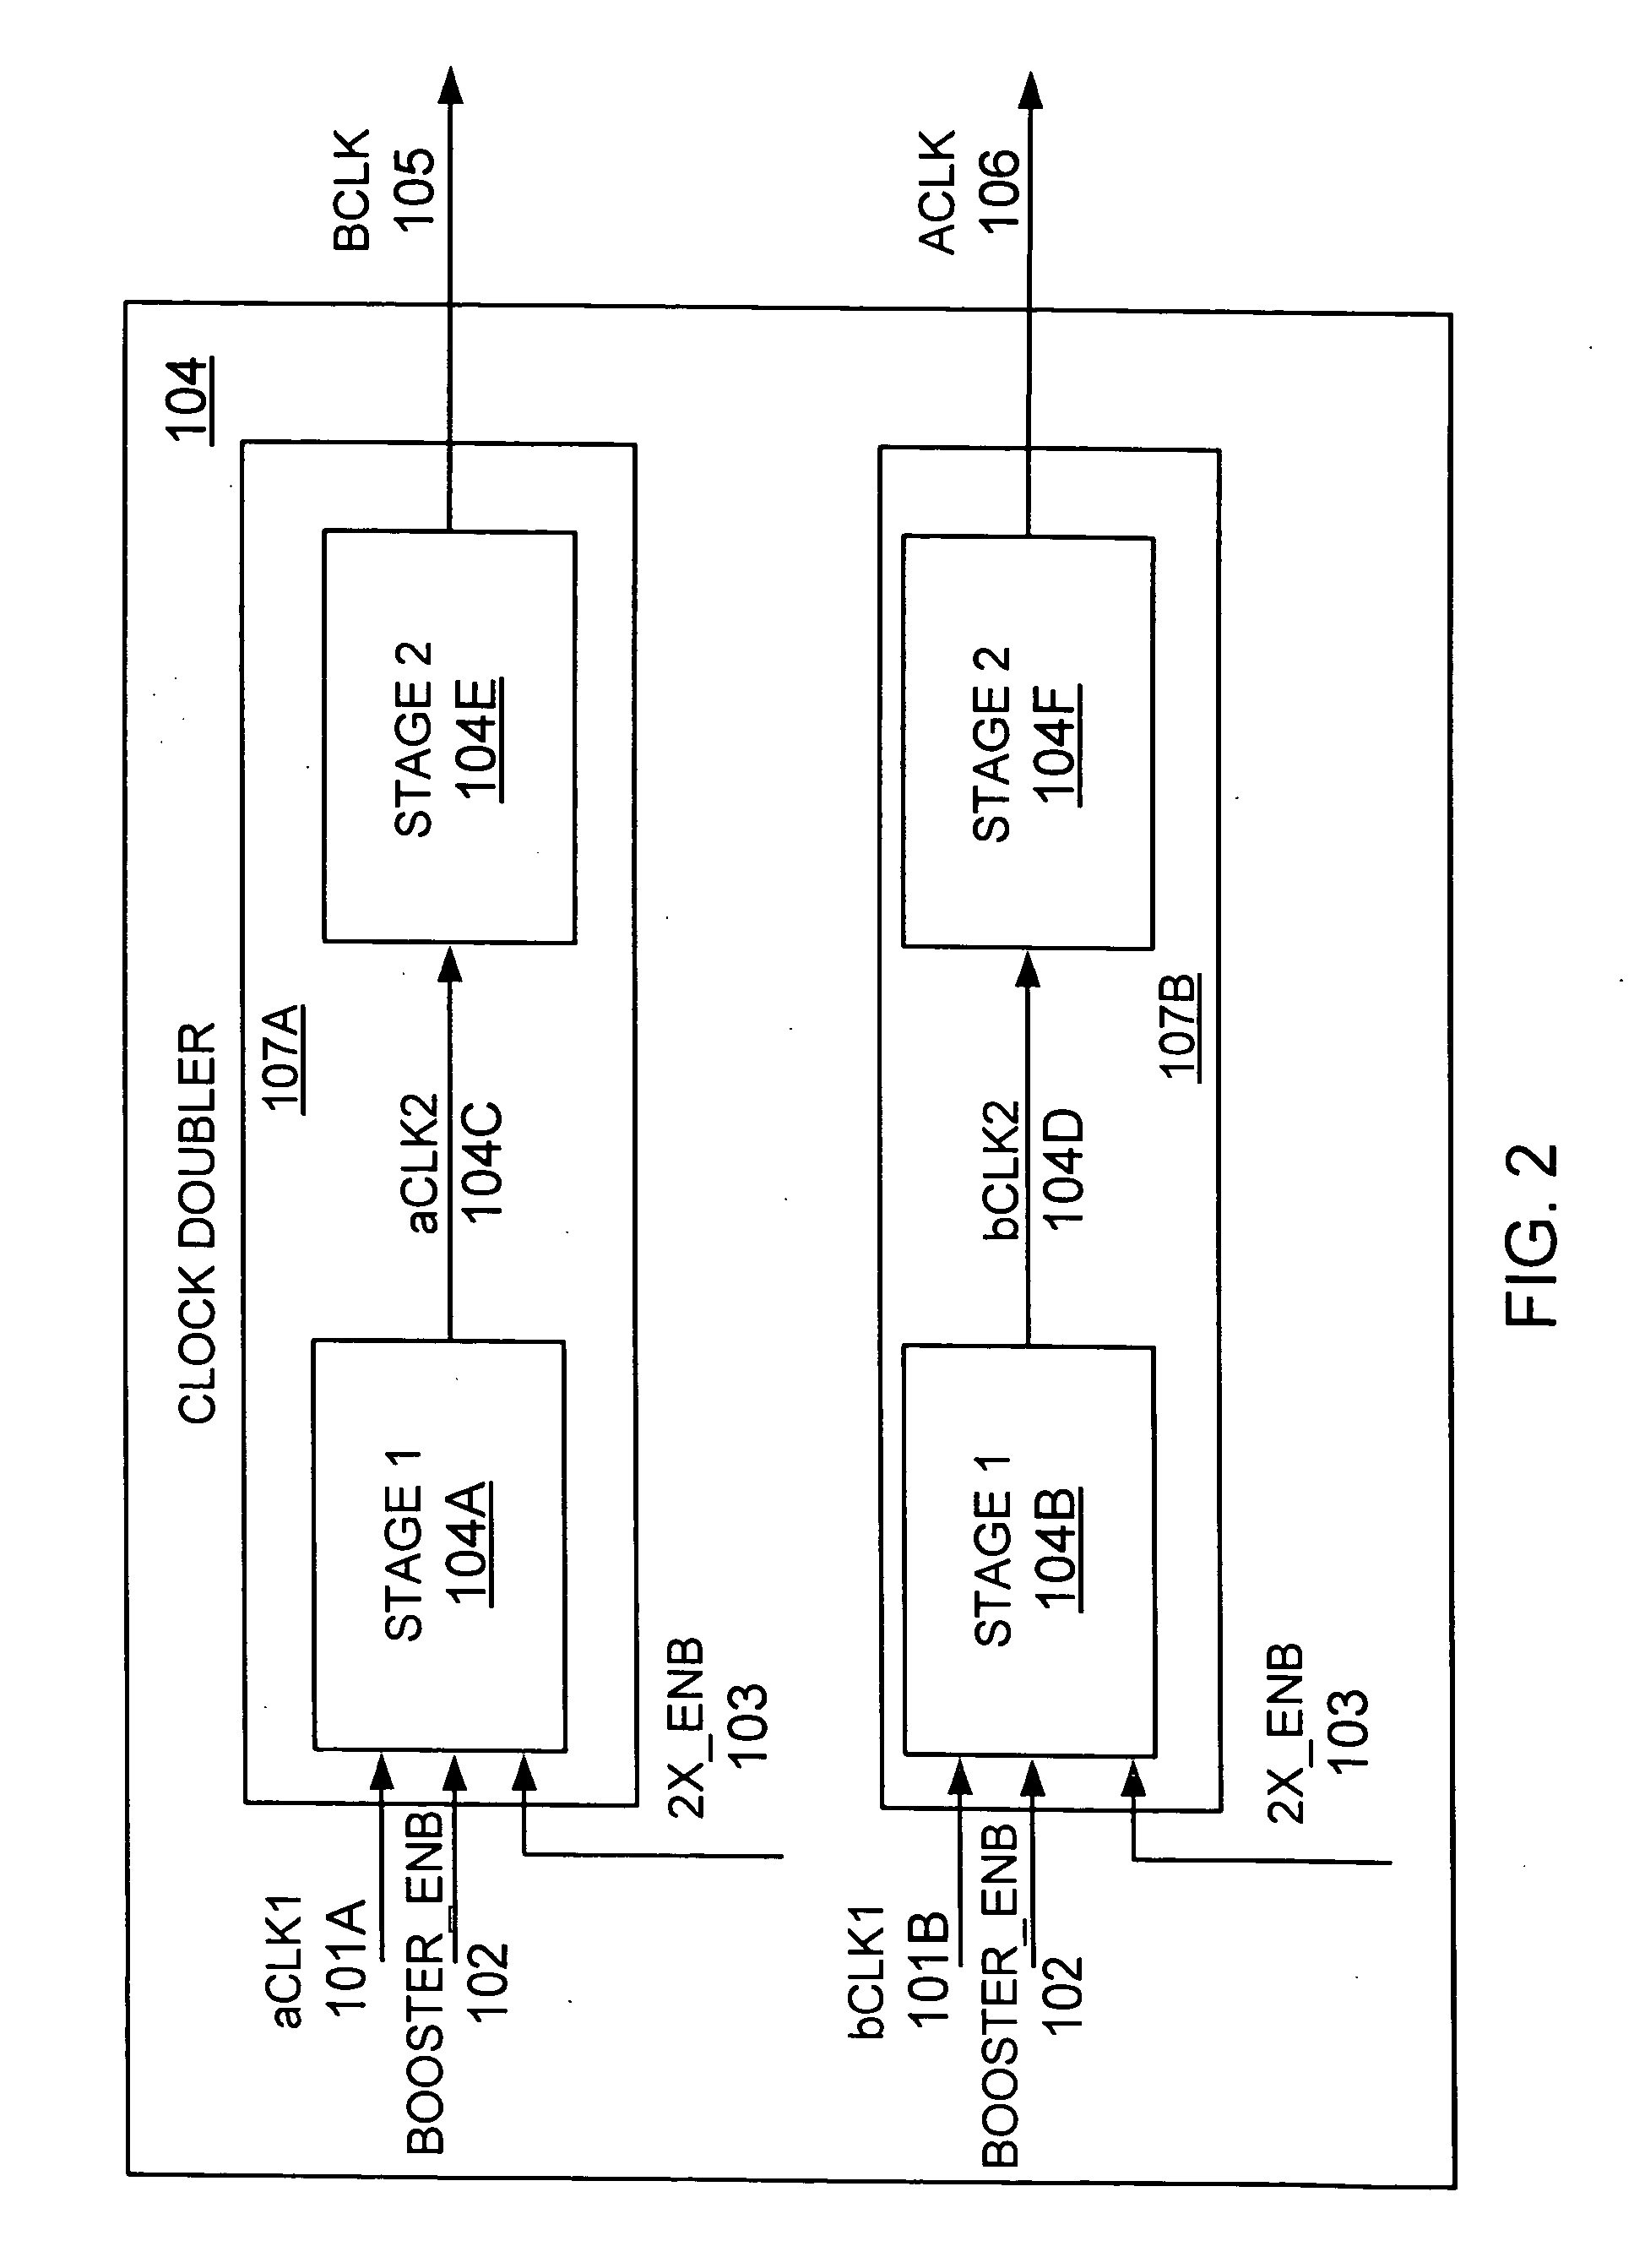 System and method for low voltage booster circuits